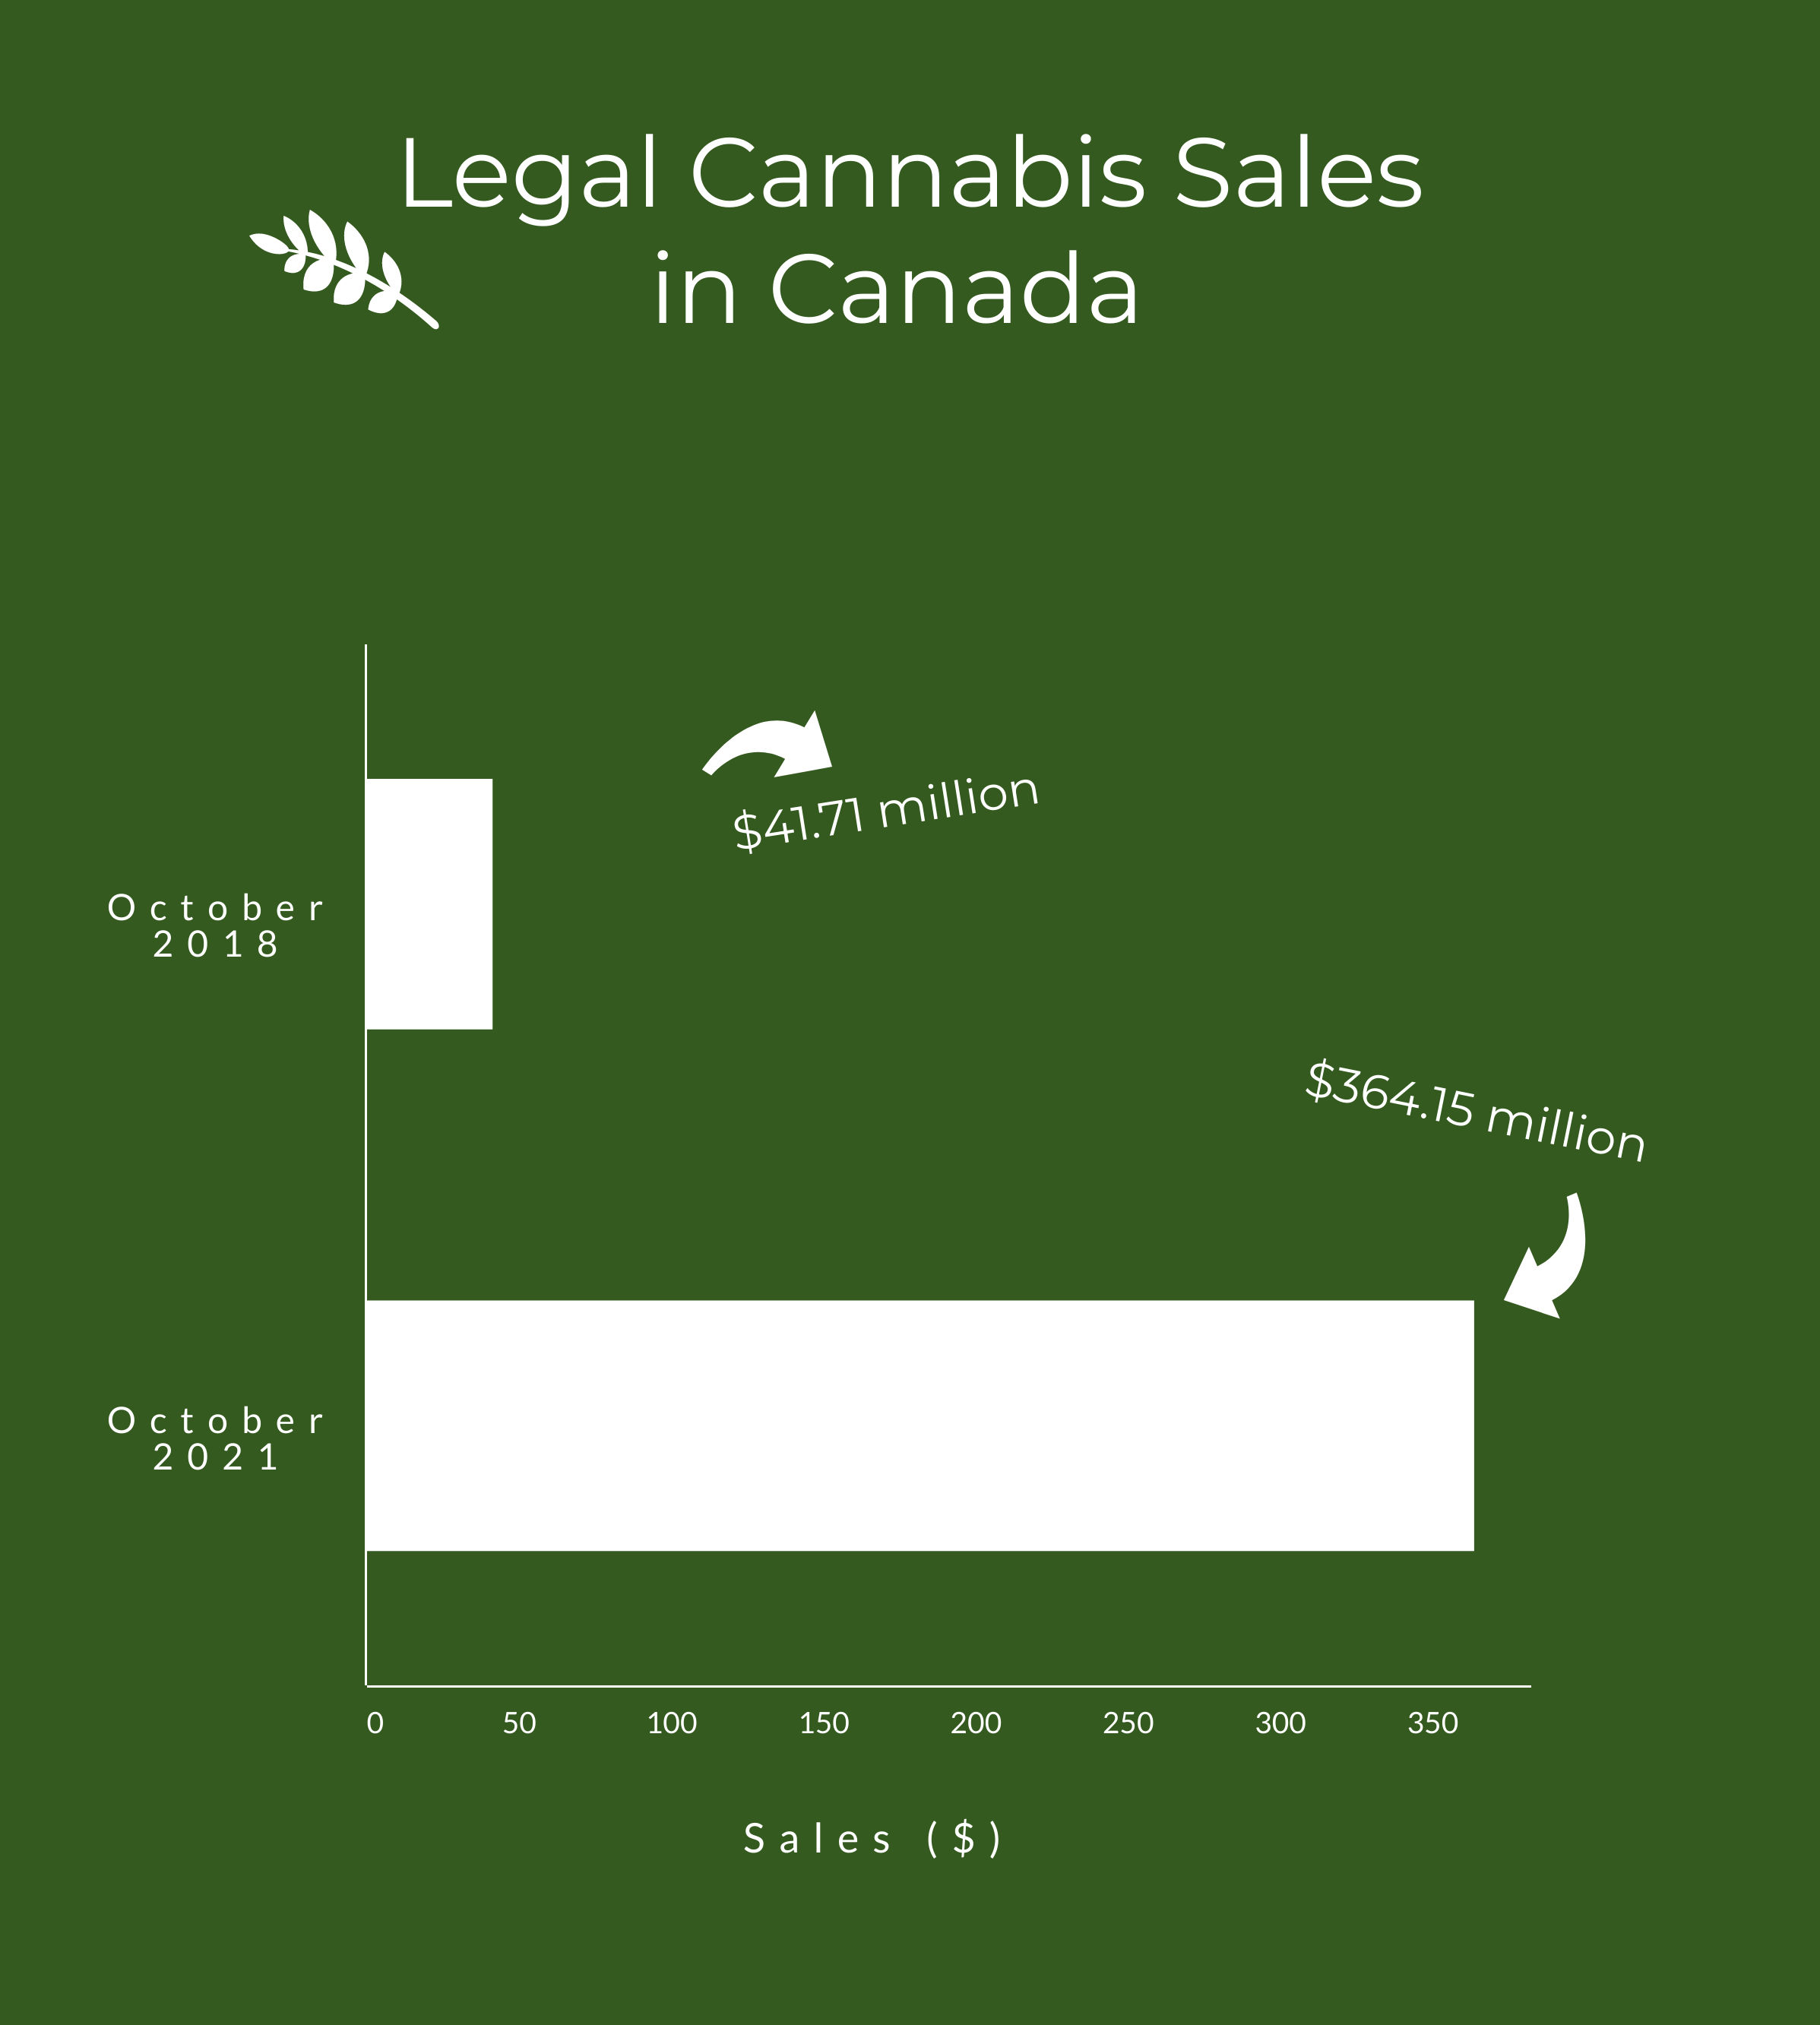 An Infrographic depicting the increase in legal cannabis sales in Canada since legalization in 2018. 